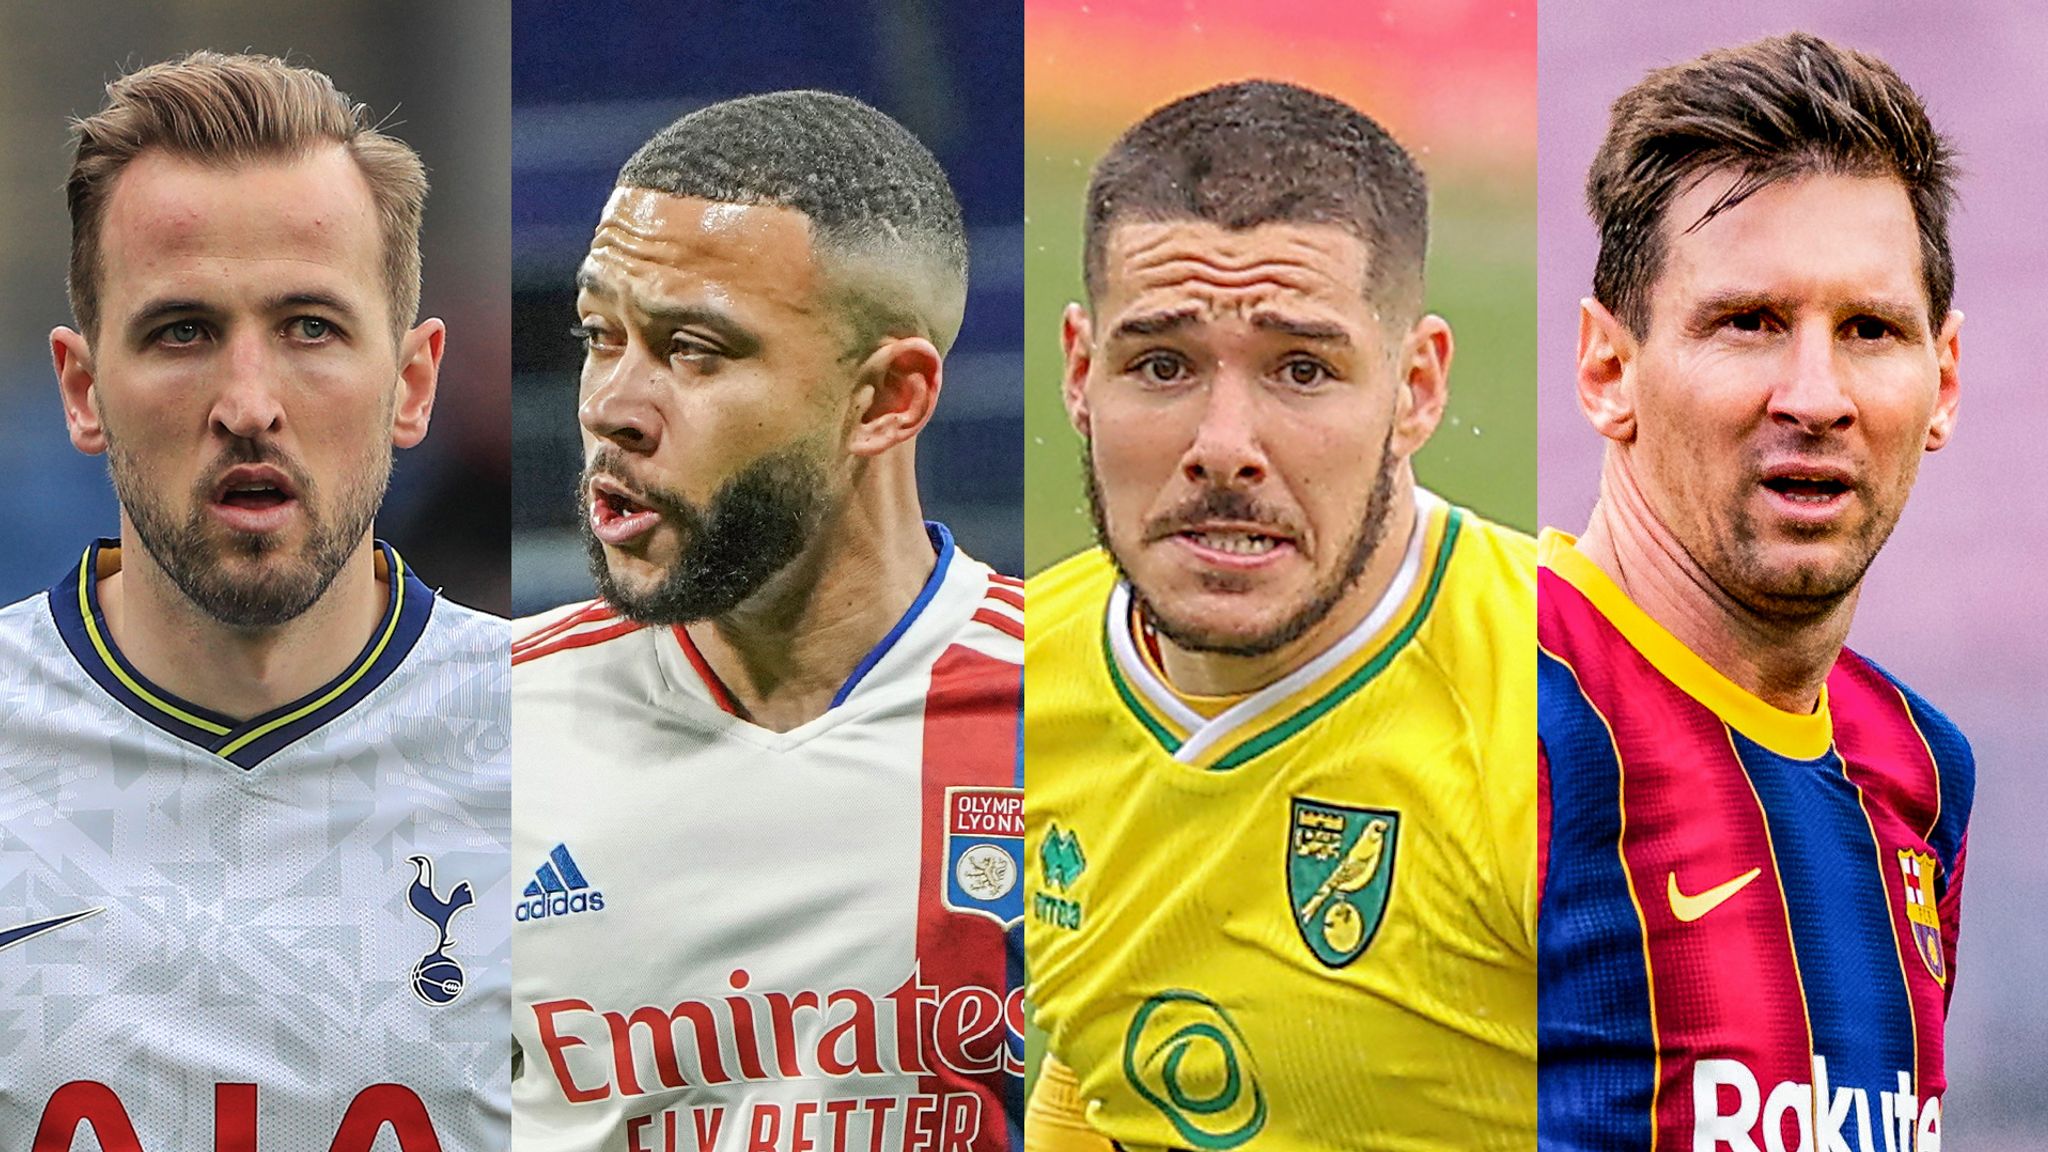 10 best players in the world this year (2021)